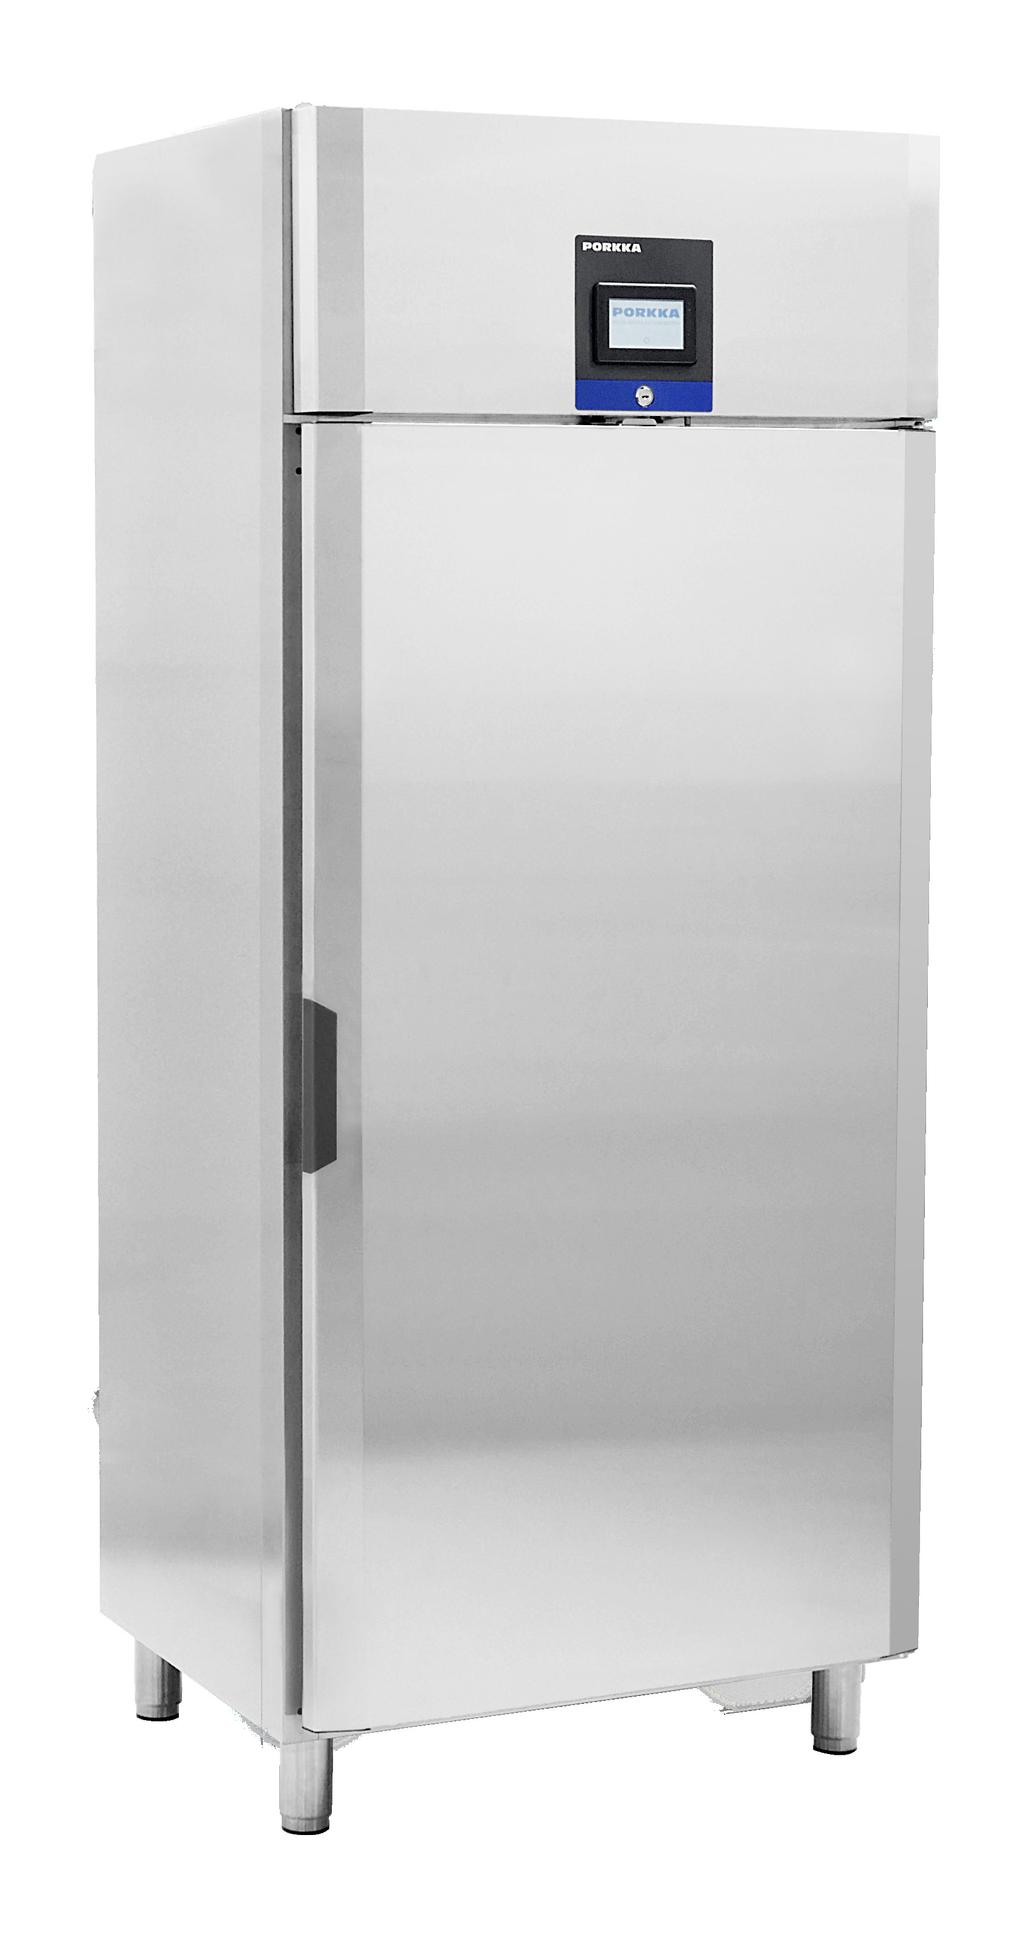 INVENTUS BLAST CABINETS Inventus Blast Cabinets The range of Porkka Inventus BC/BF Blast Chiller and Blast Freezers is versatile and can be used for a multitude of different applications.